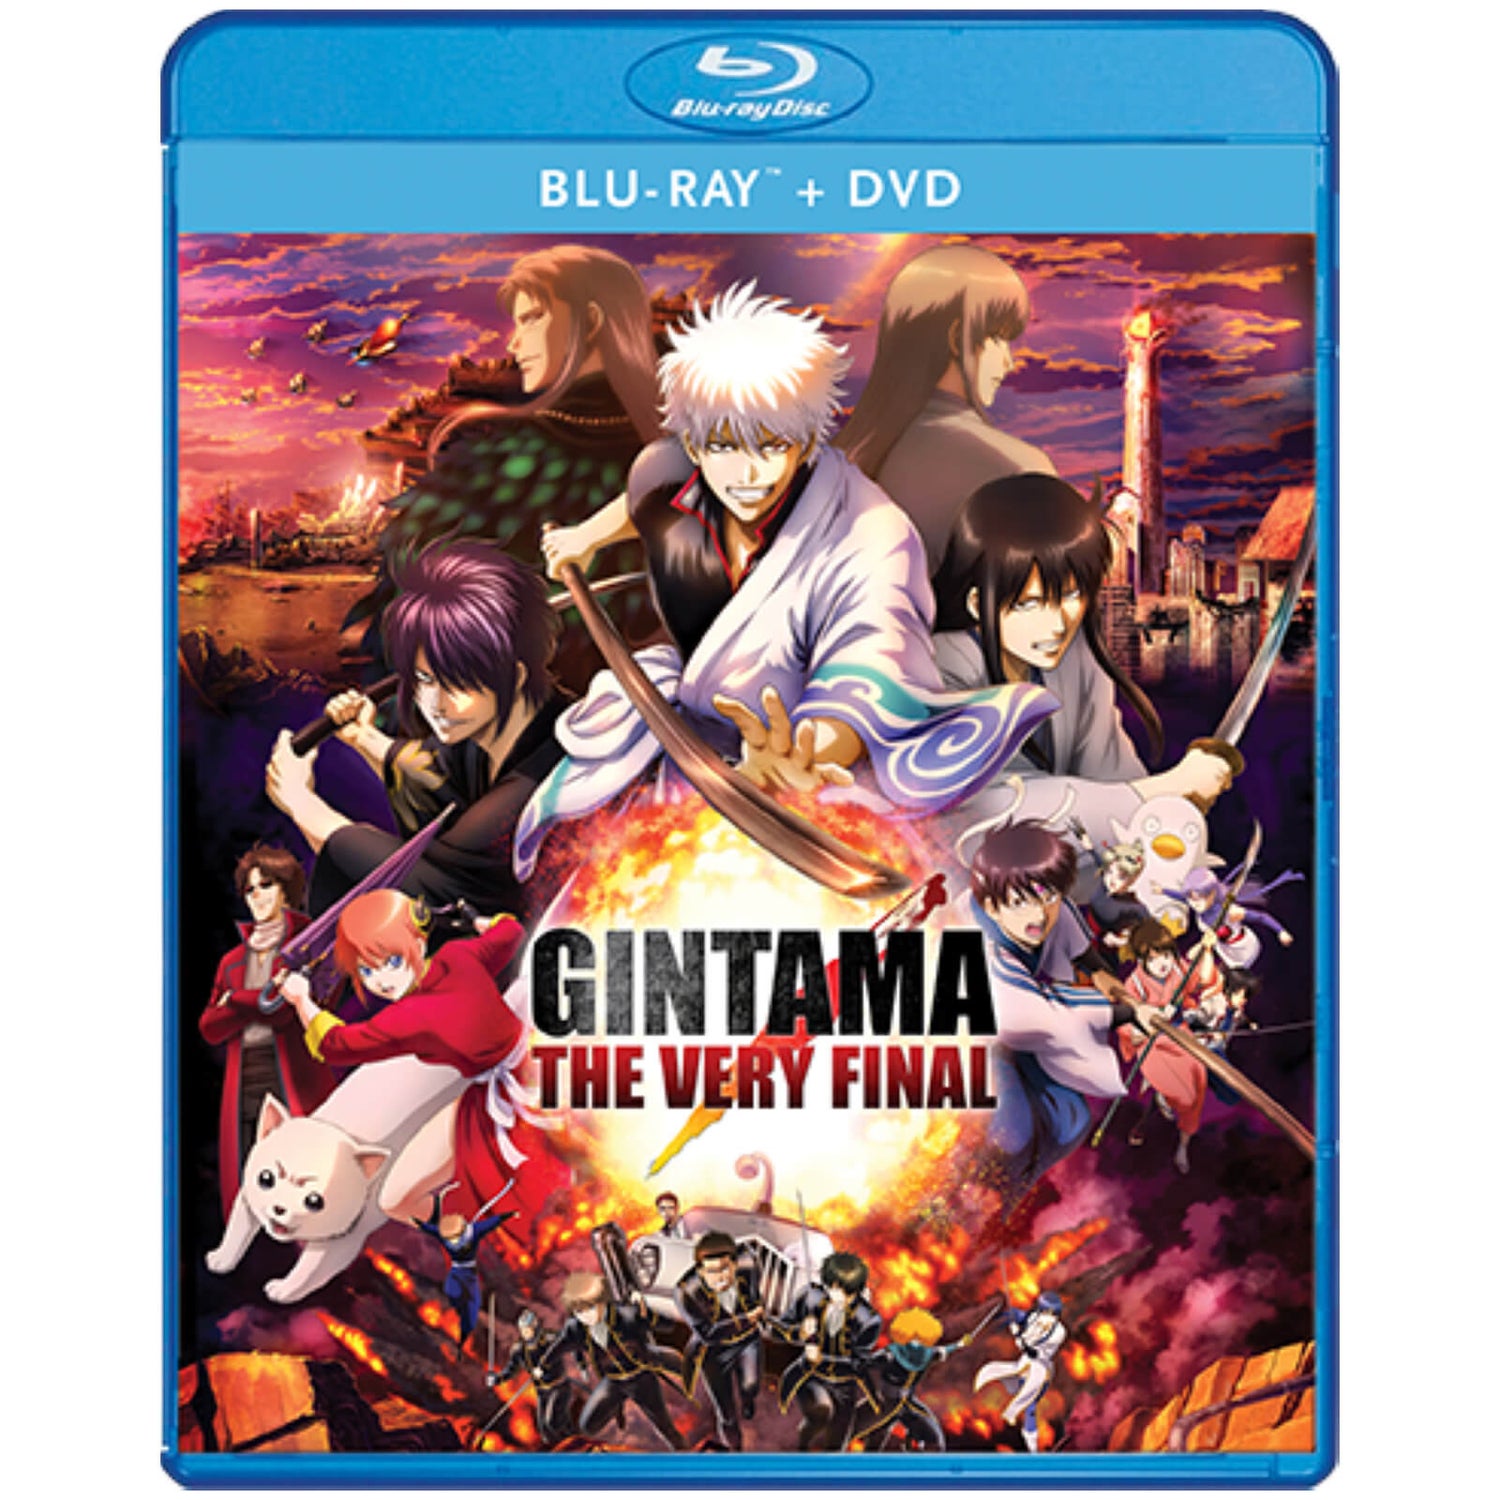 Gintama: The Very Final (Includes Blu-ray)